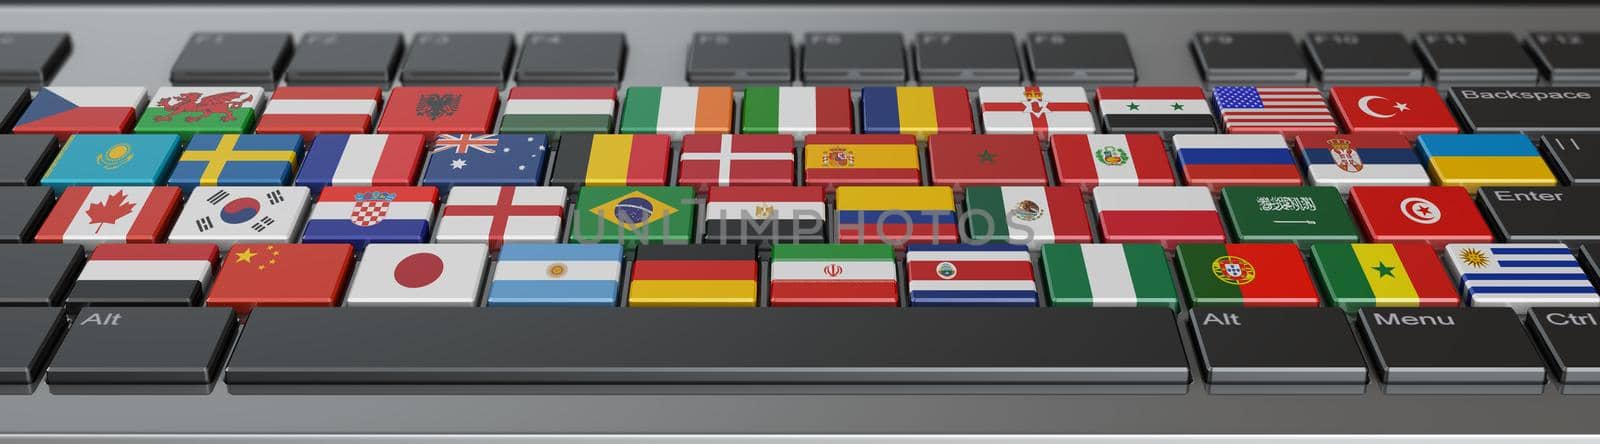 Computer keyboard with flags by rommma